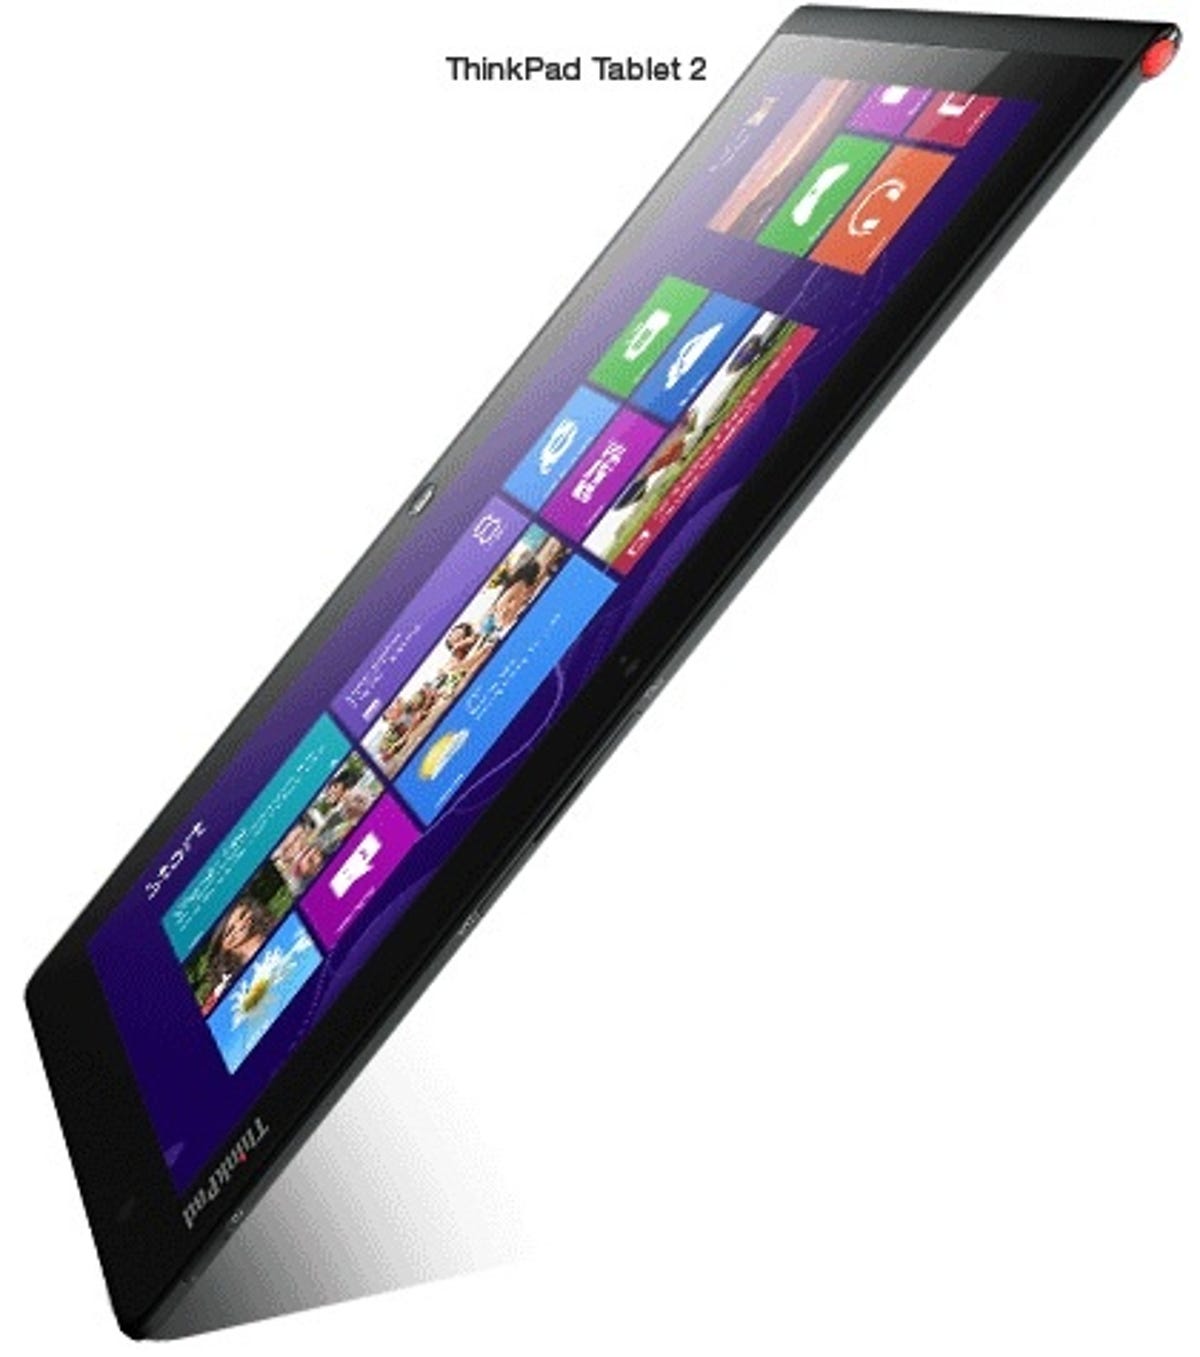 It's not clear when the ThinkPad Tablet 2 will ship to consumers.